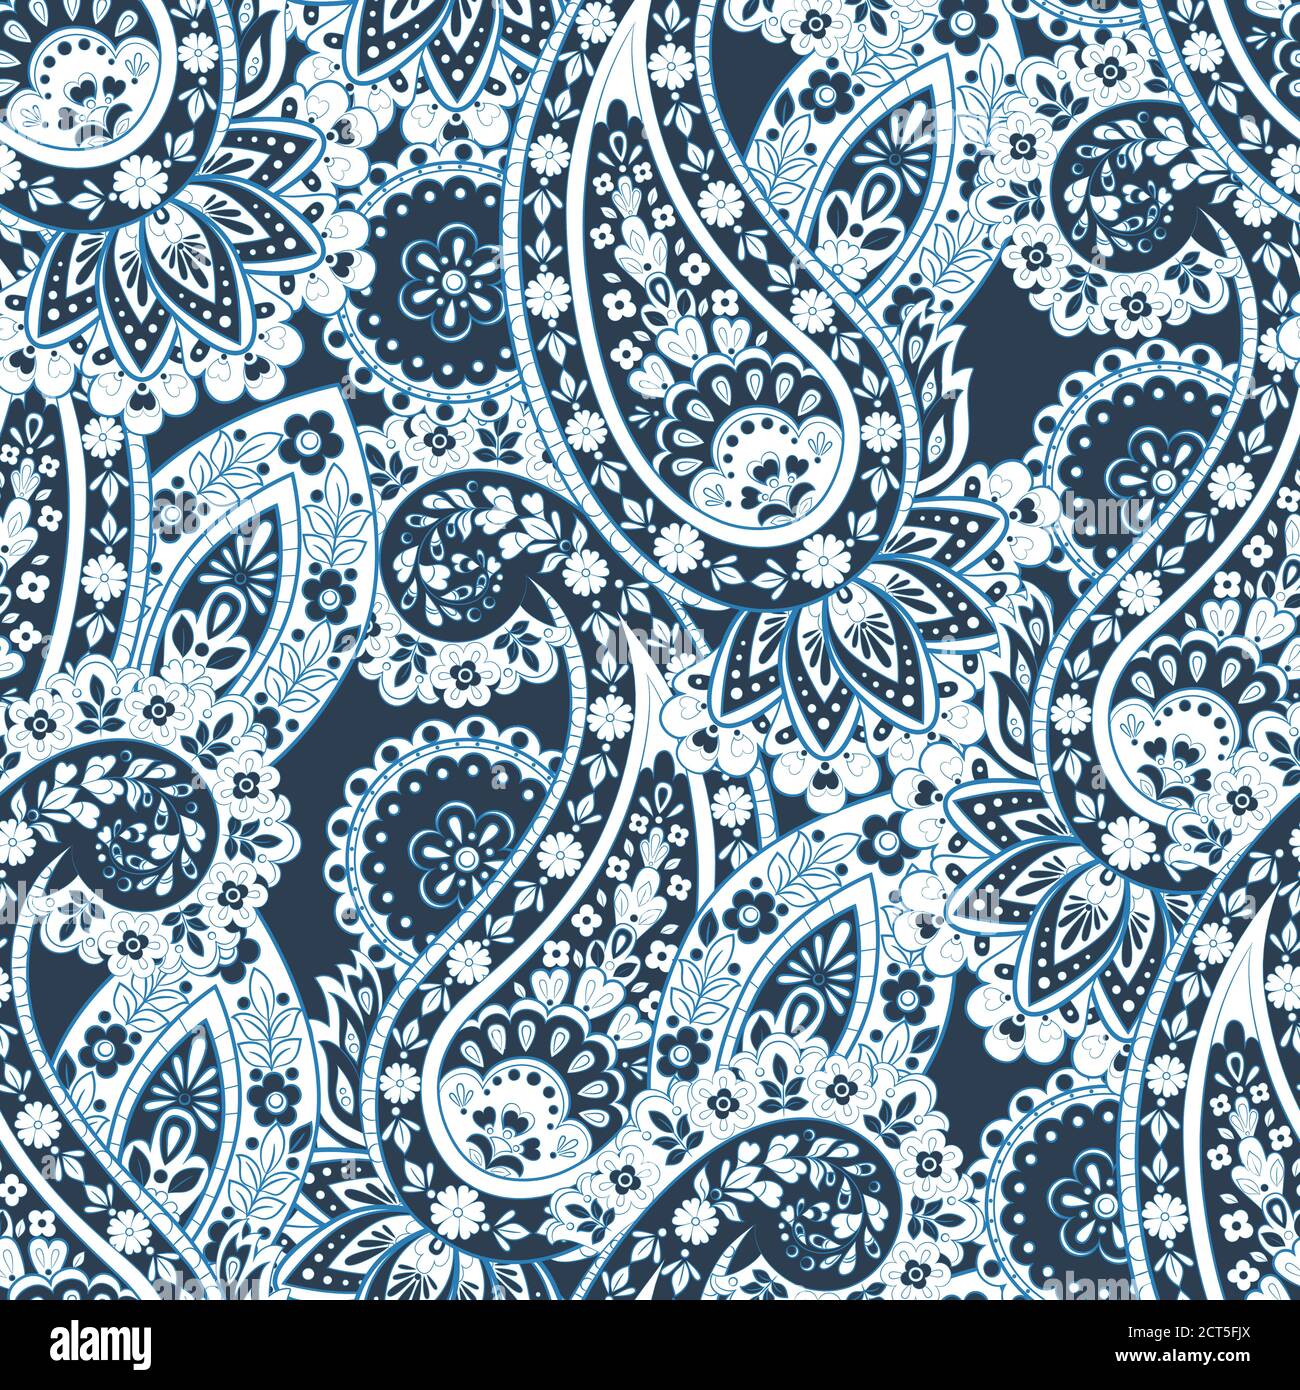 Seamless Paisley pattern. Floral vector illustration Stock Vector